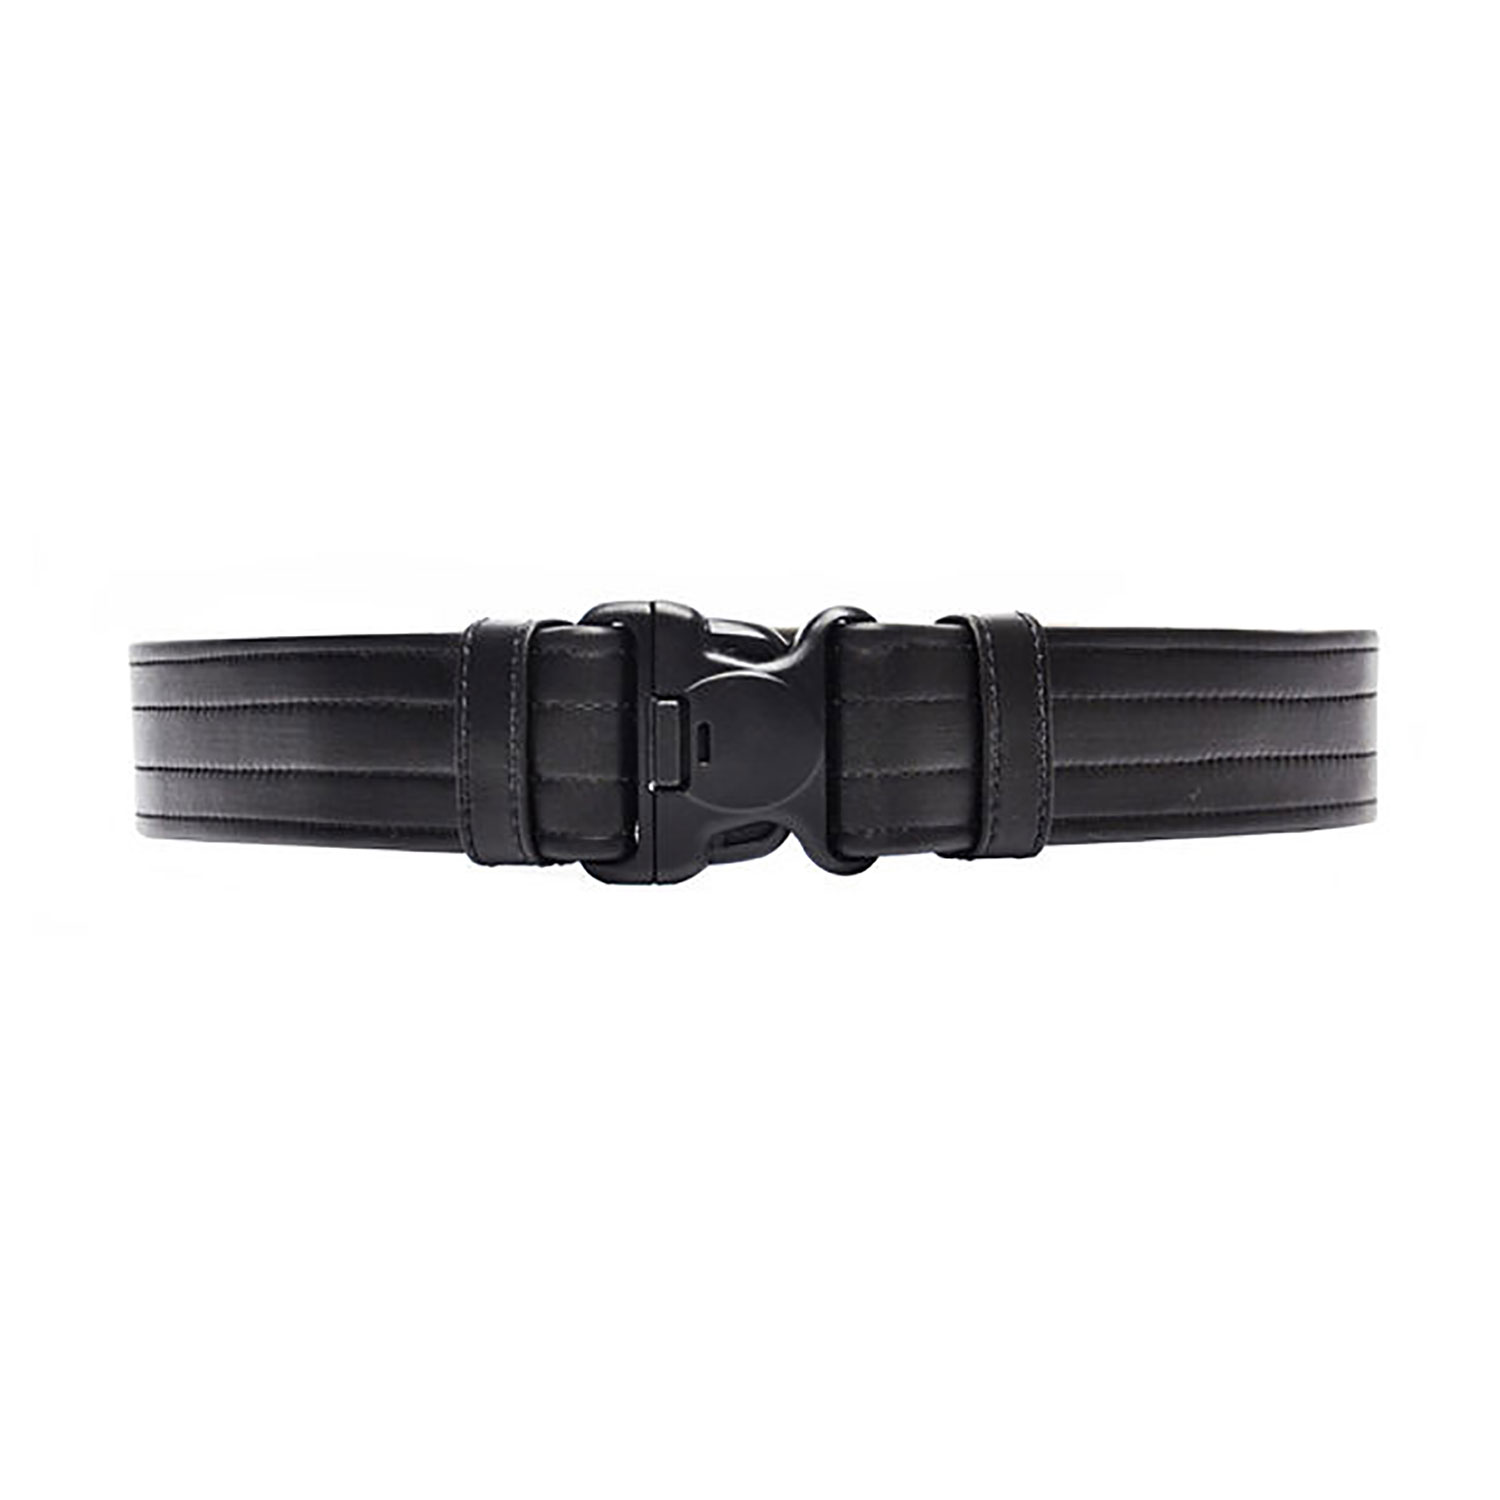 SAFARILAND MODEL 94B OUTER DUTY BELT WITH 3 POINT RELEASE